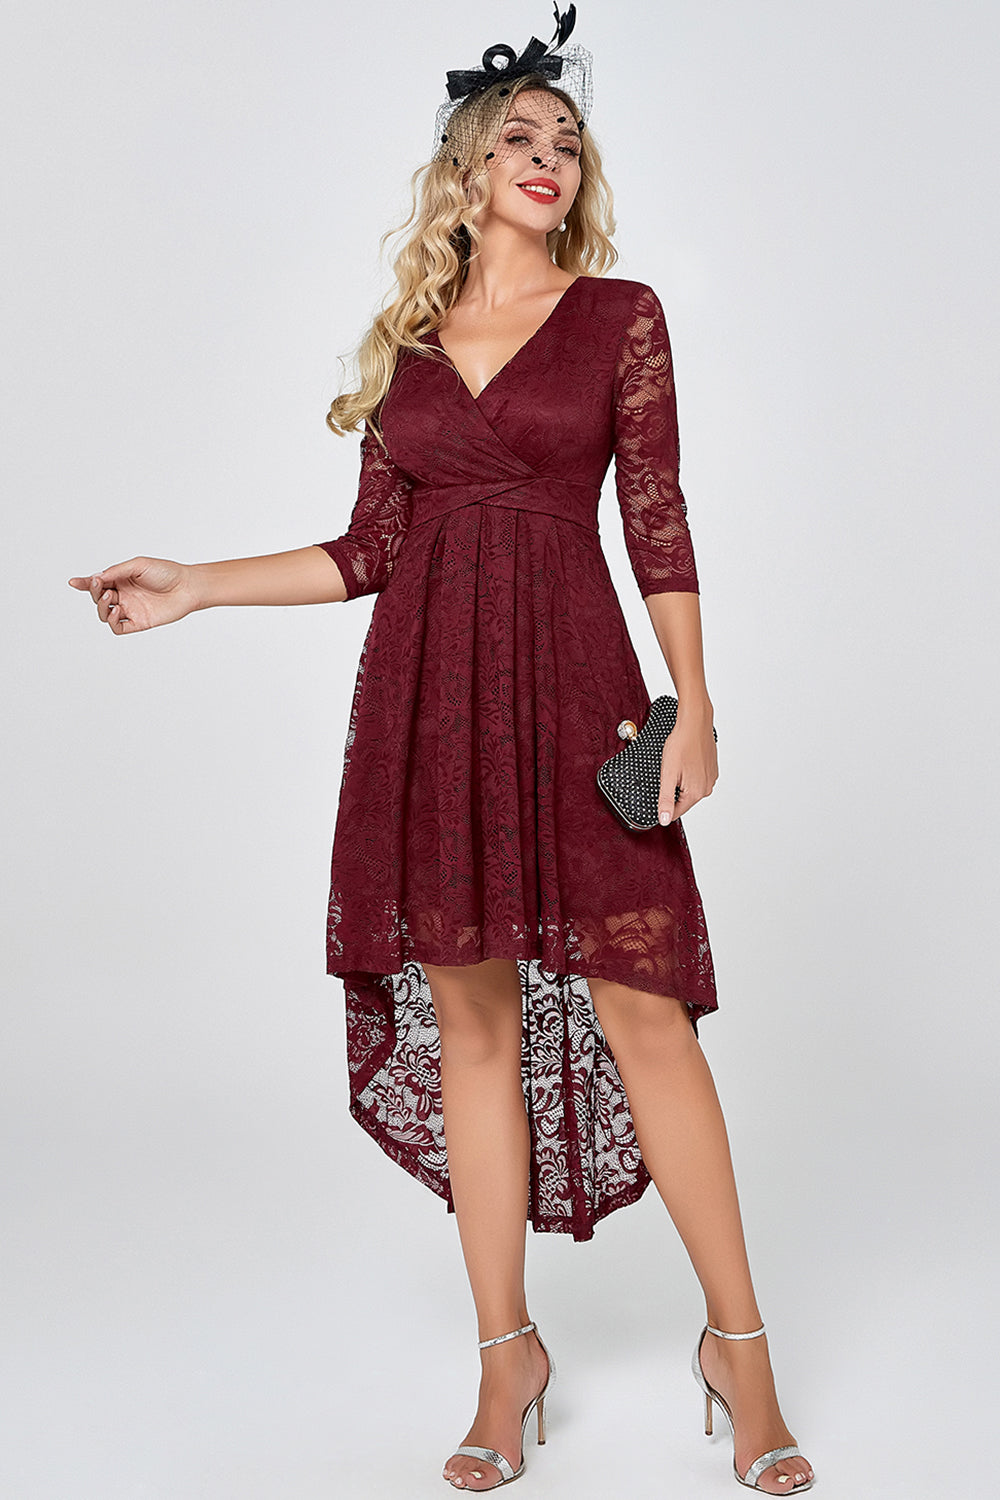 Burgundy High Low Lace Bridesmaid Dress with Sleeves